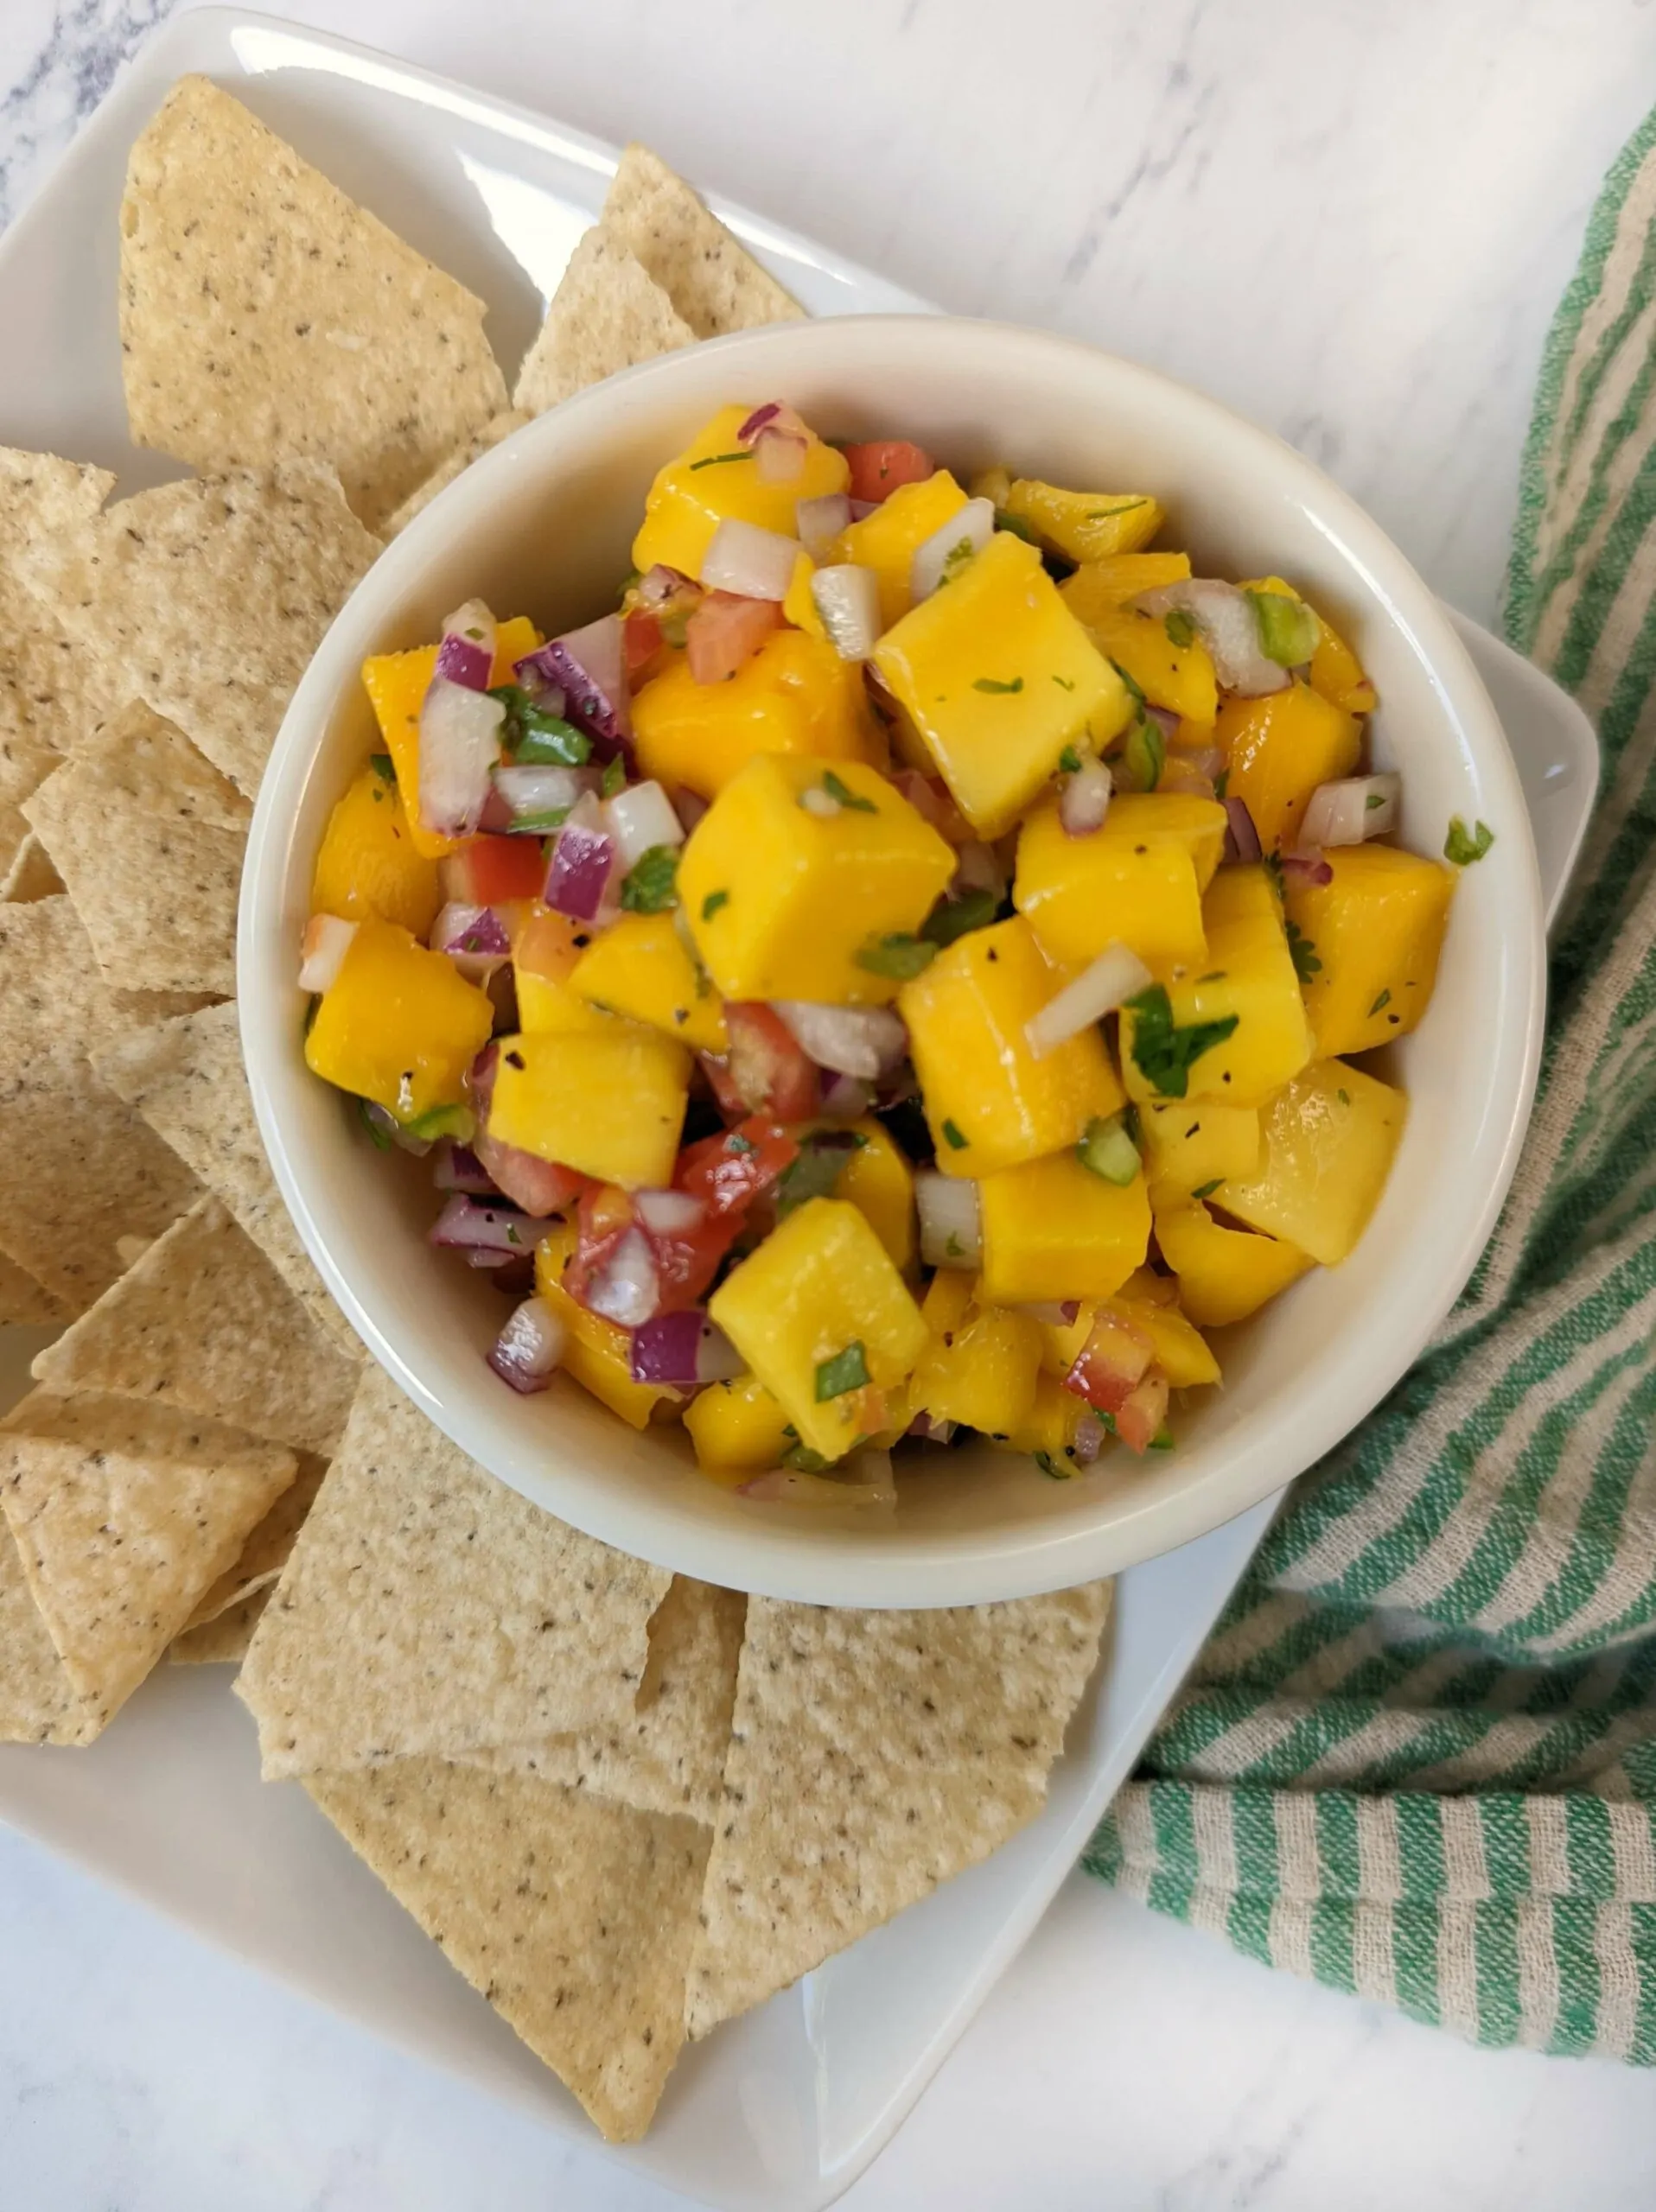 Mango salsa in a bowl next to chips.